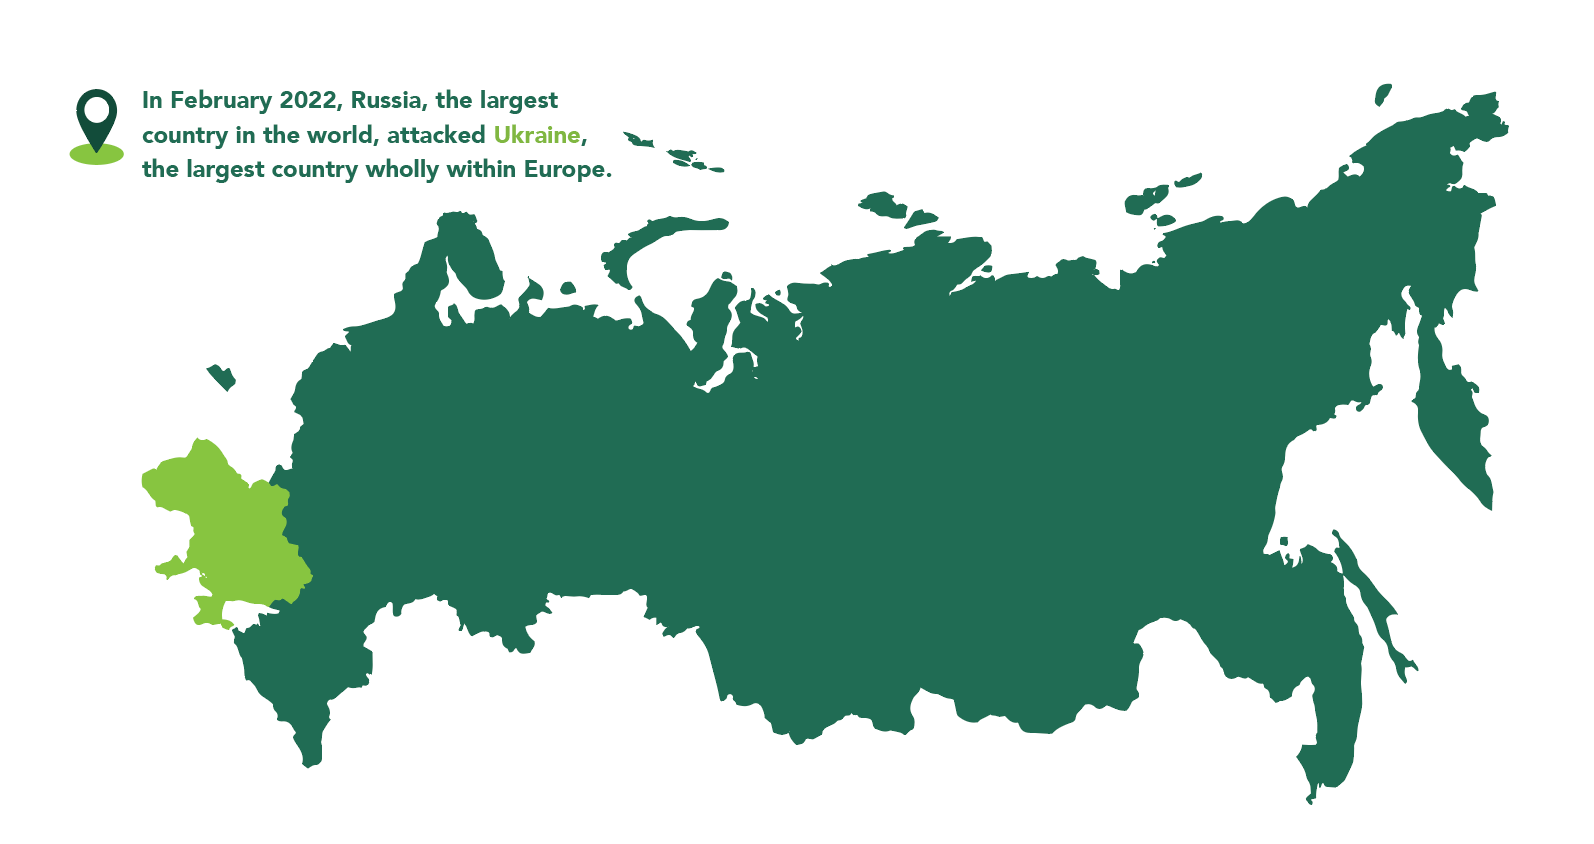 Simple map of Russia and Ukraine showing sizes of the countries. 